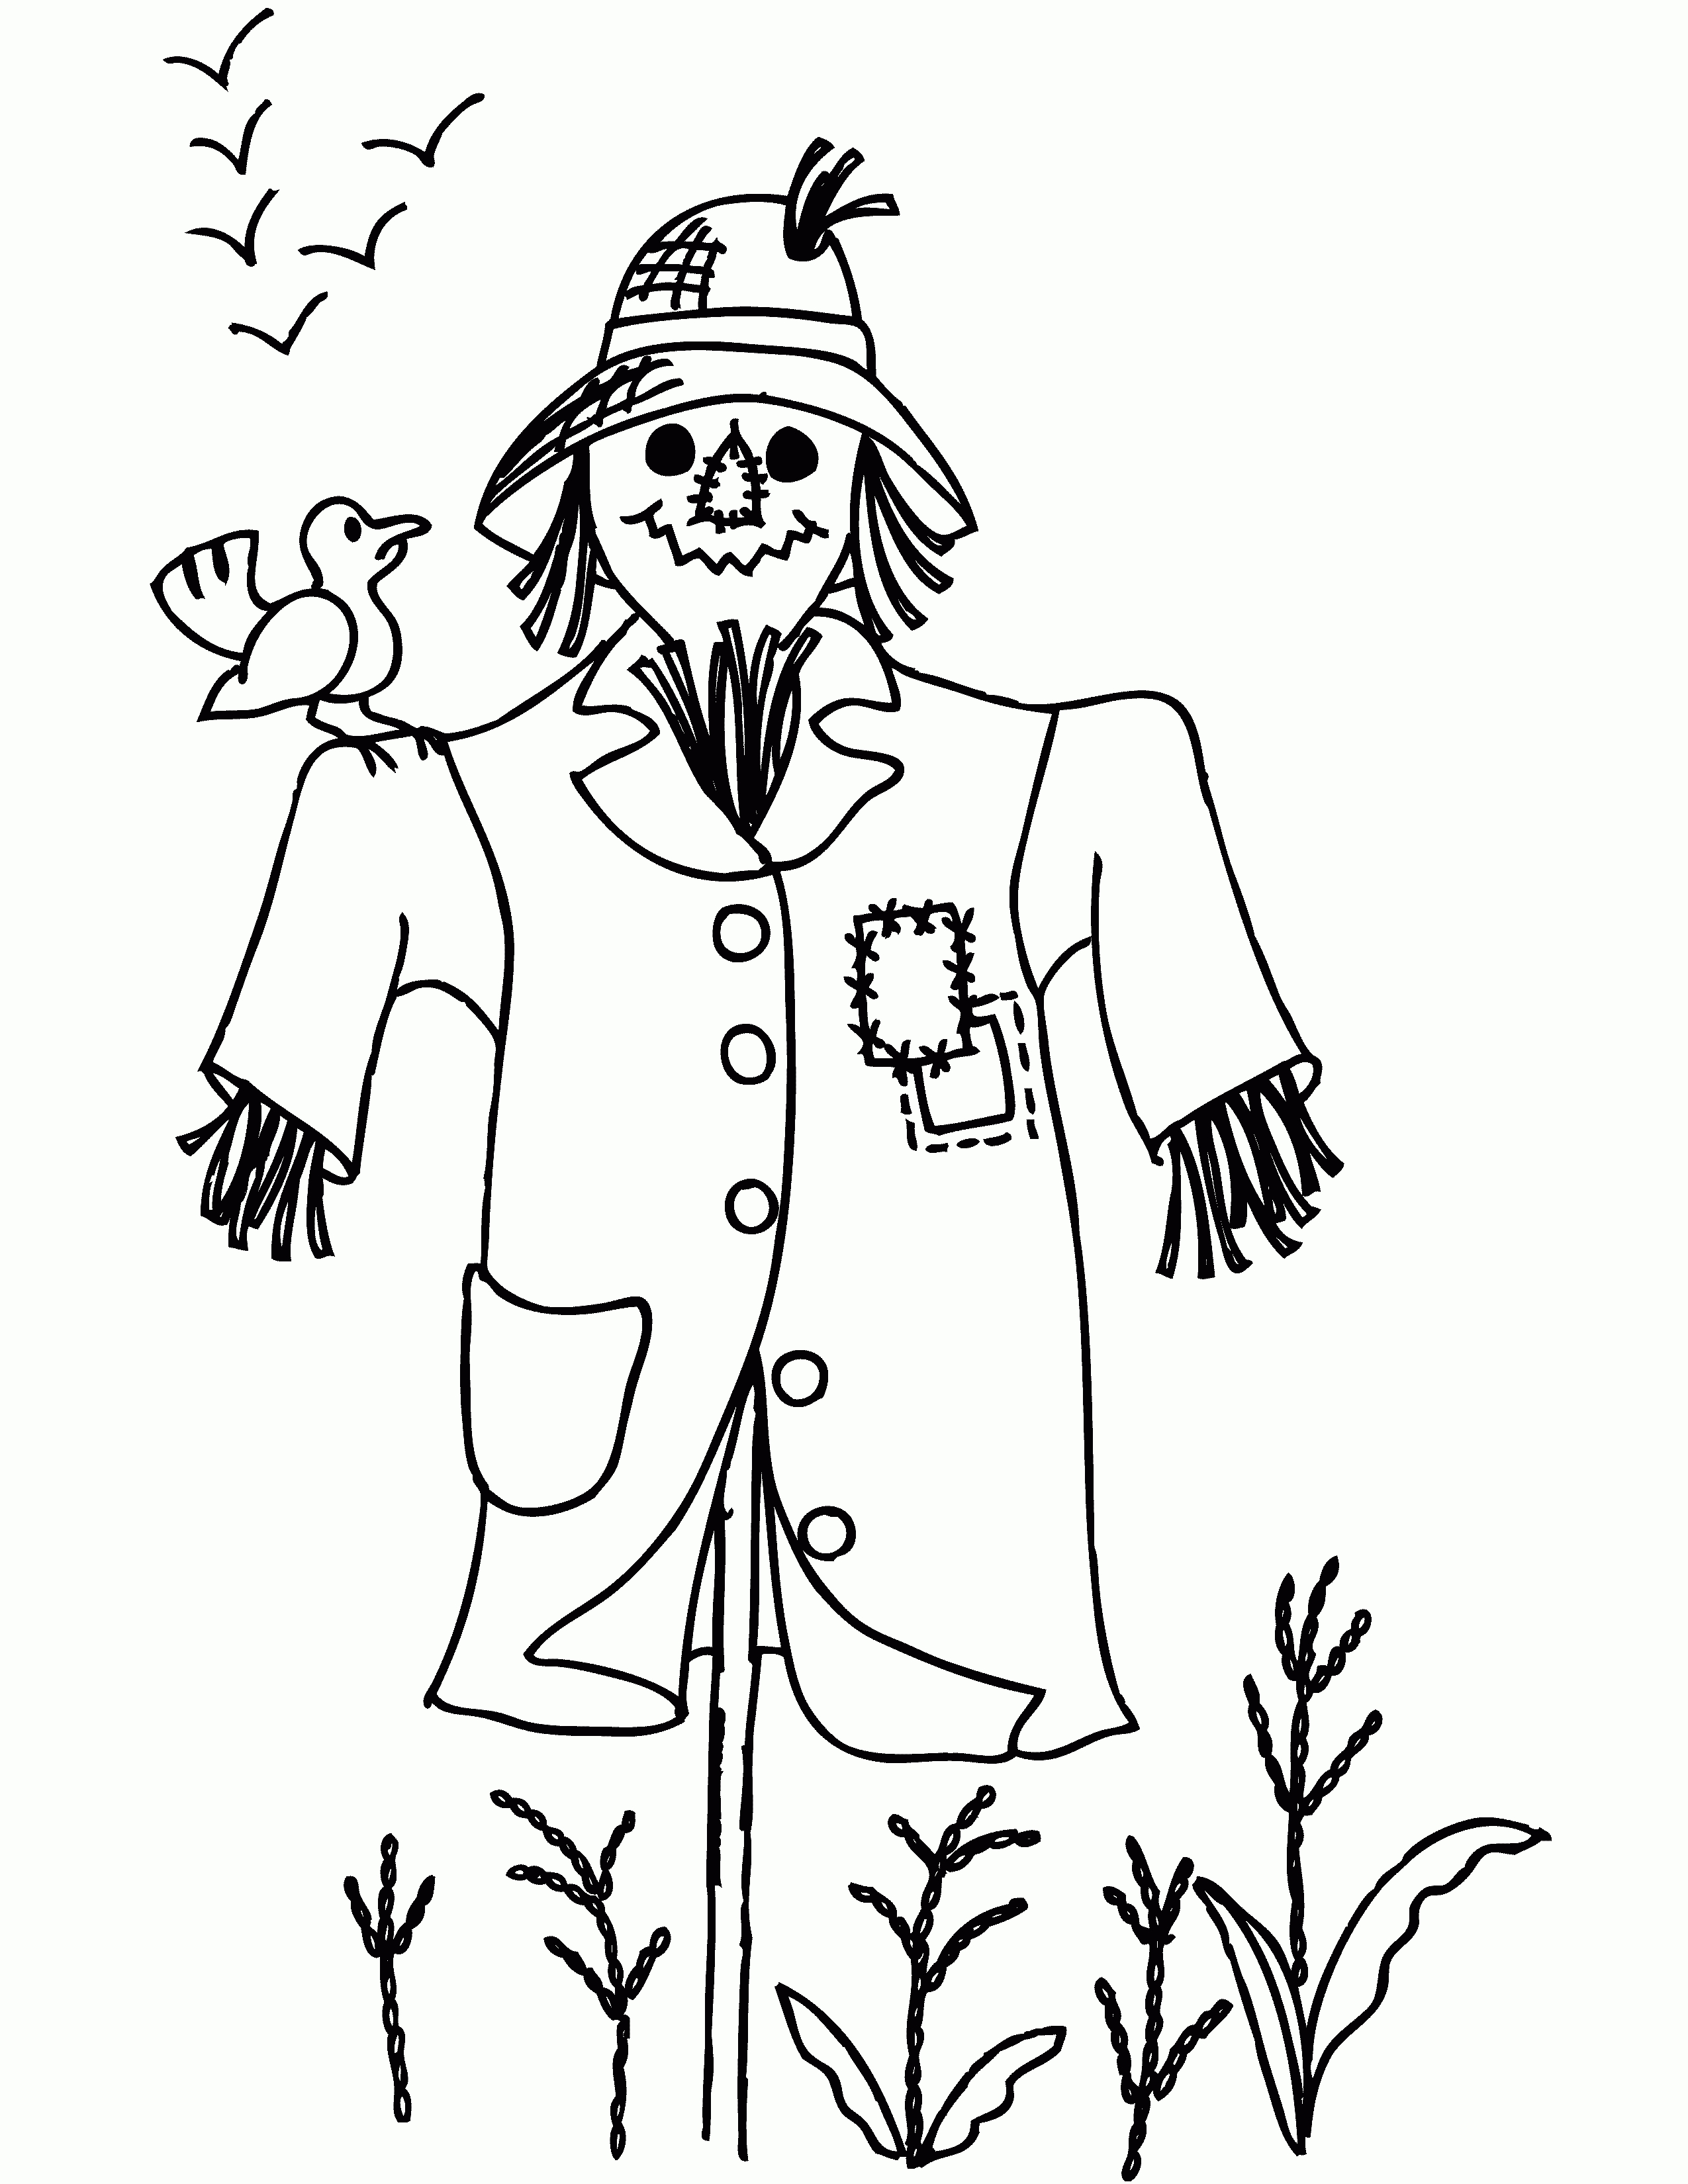 Free Printable Scarecrow Coloring Pages For Kids | Clip Art | Fall - Free Scarecrow Template Printable